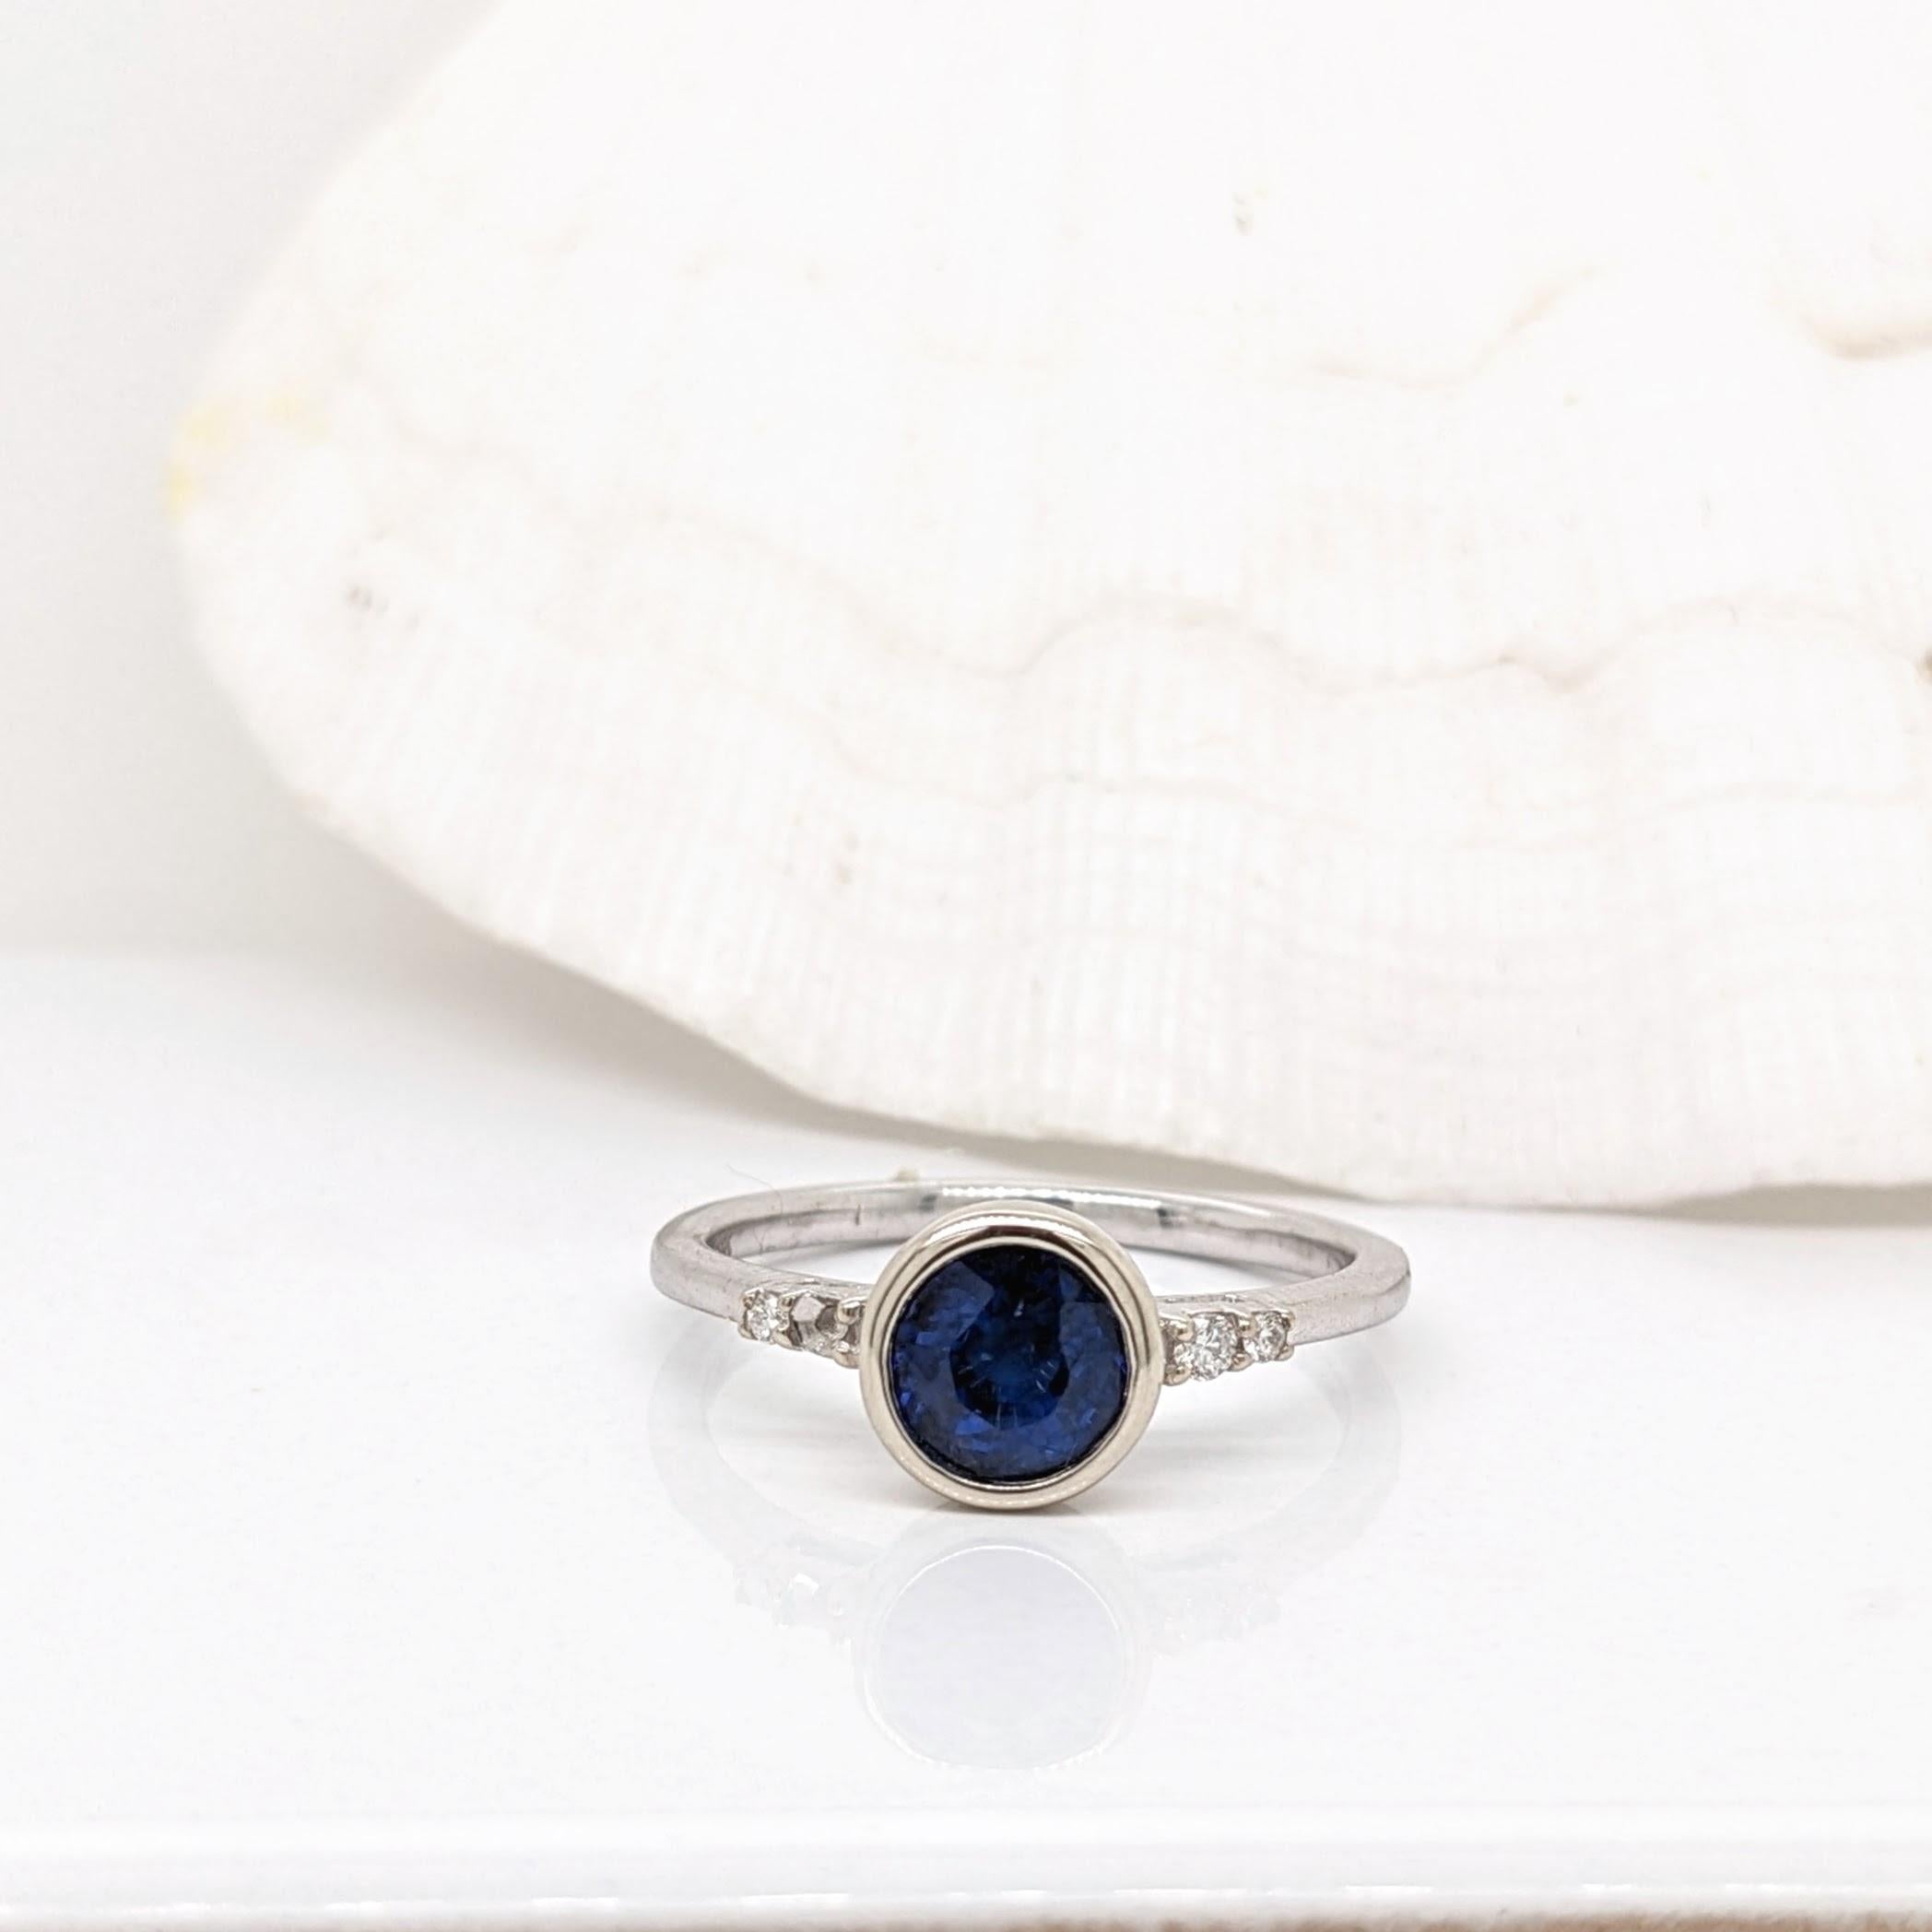 This adorable ring features a stunning deep blue Sapphire in 14k white Gold with diamond accents. This classic ring makes for a stunning accessory to any look!

Specifications:

Item Type: Ring
Center Stone: Sapphire
Treatment: Diffused
Weight: